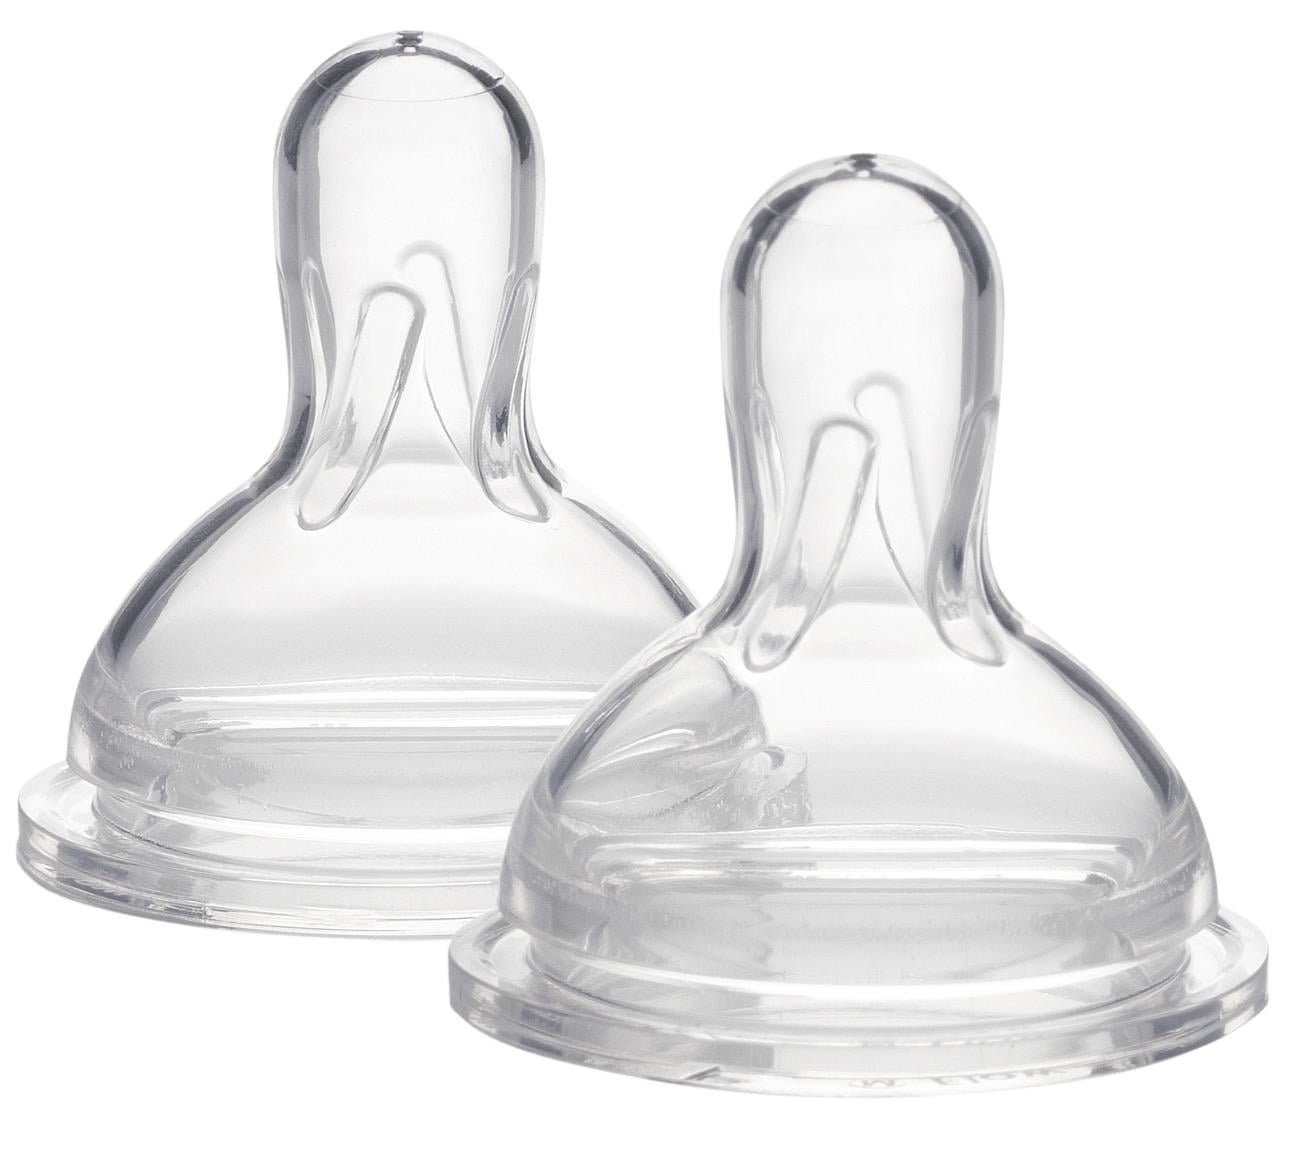  Medela Slow Flow Bottle Nipples with Wide Base, Baby Newborns  Age 0-4 Months, Compatible with All Medela Breast Milk Bottles, Made  Without BPA, 3 Count (Pack of 1) : Baby Bottle Nipples : Baby